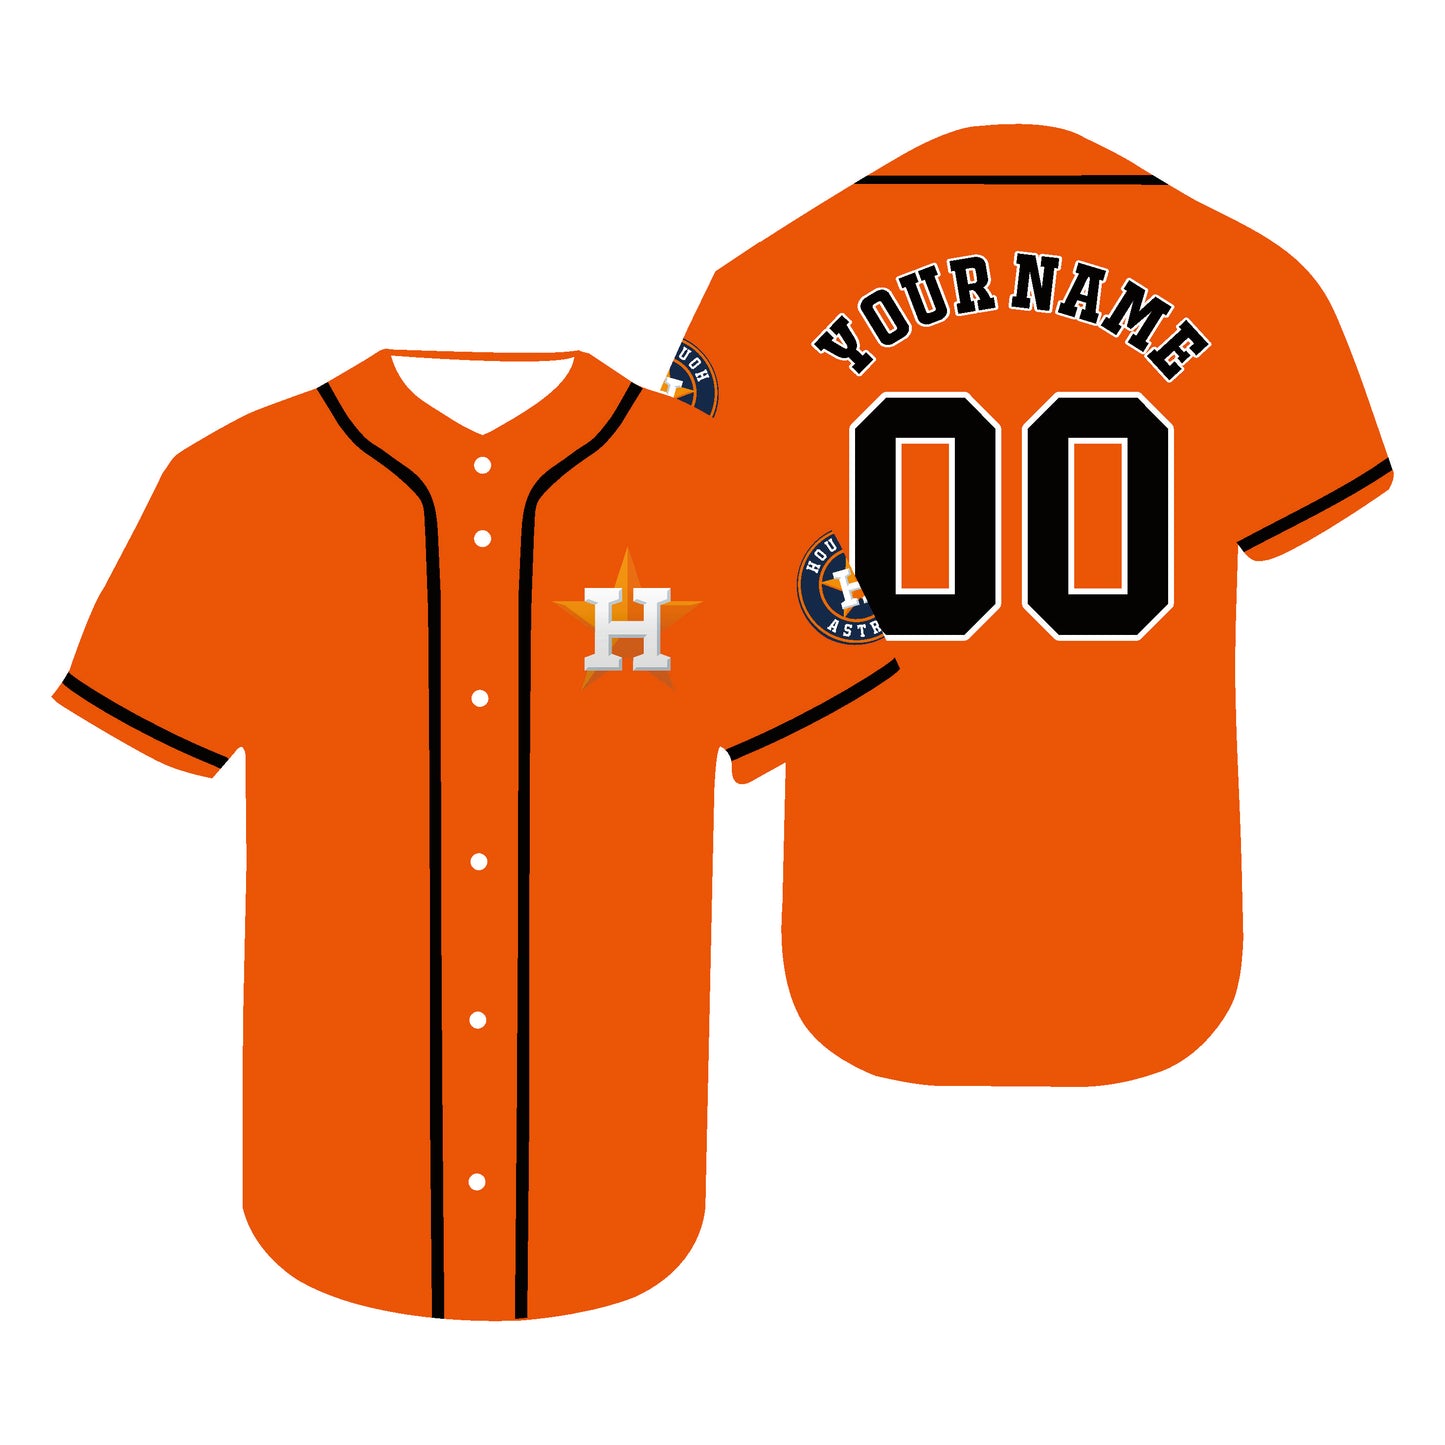 Custom Jersey of Houston Astros for Men, Women and Youth